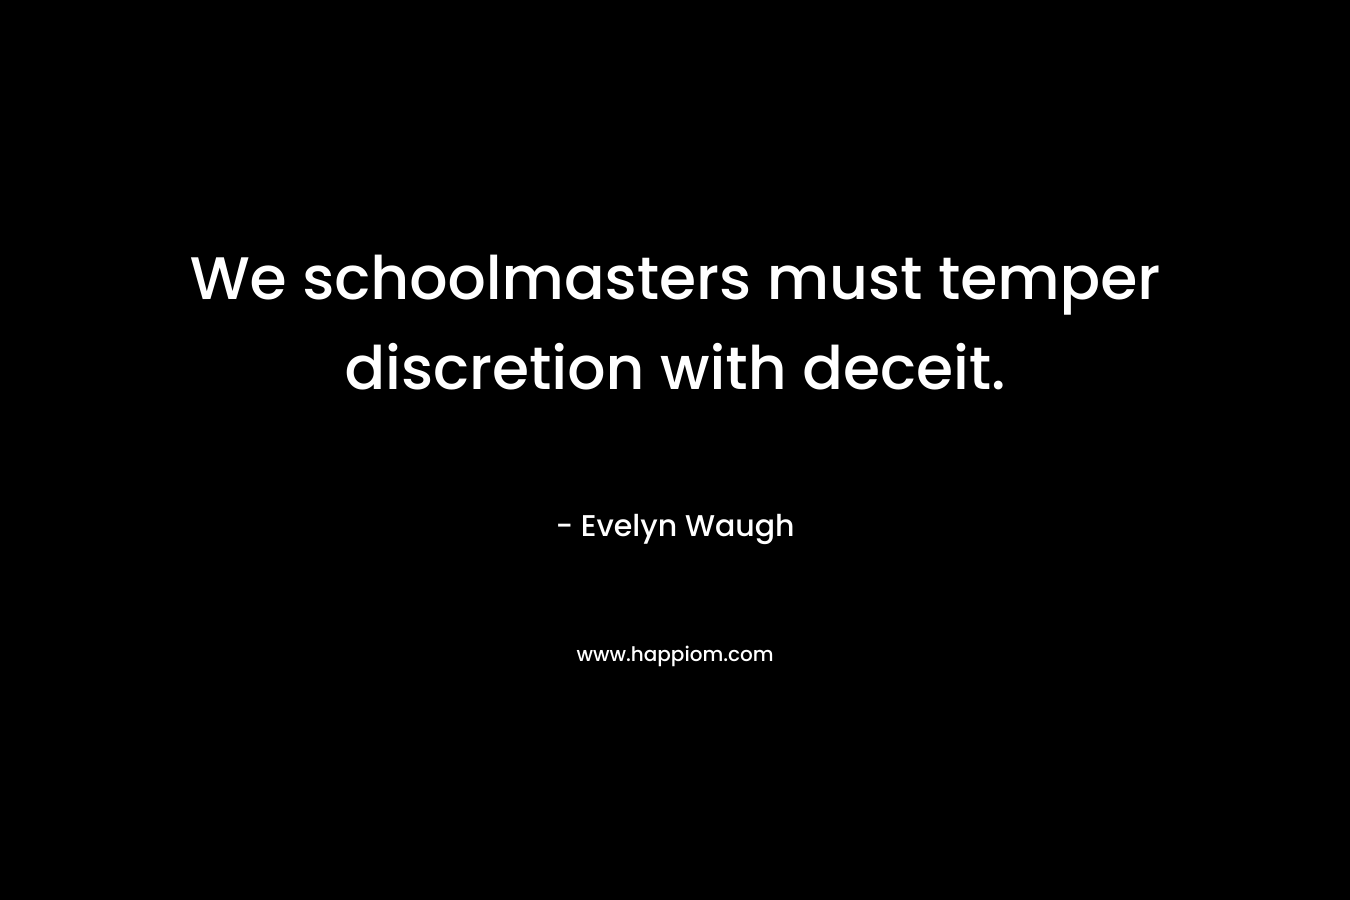 We schoolmasters must temper discretion with deceit. – Evelyn Waugh